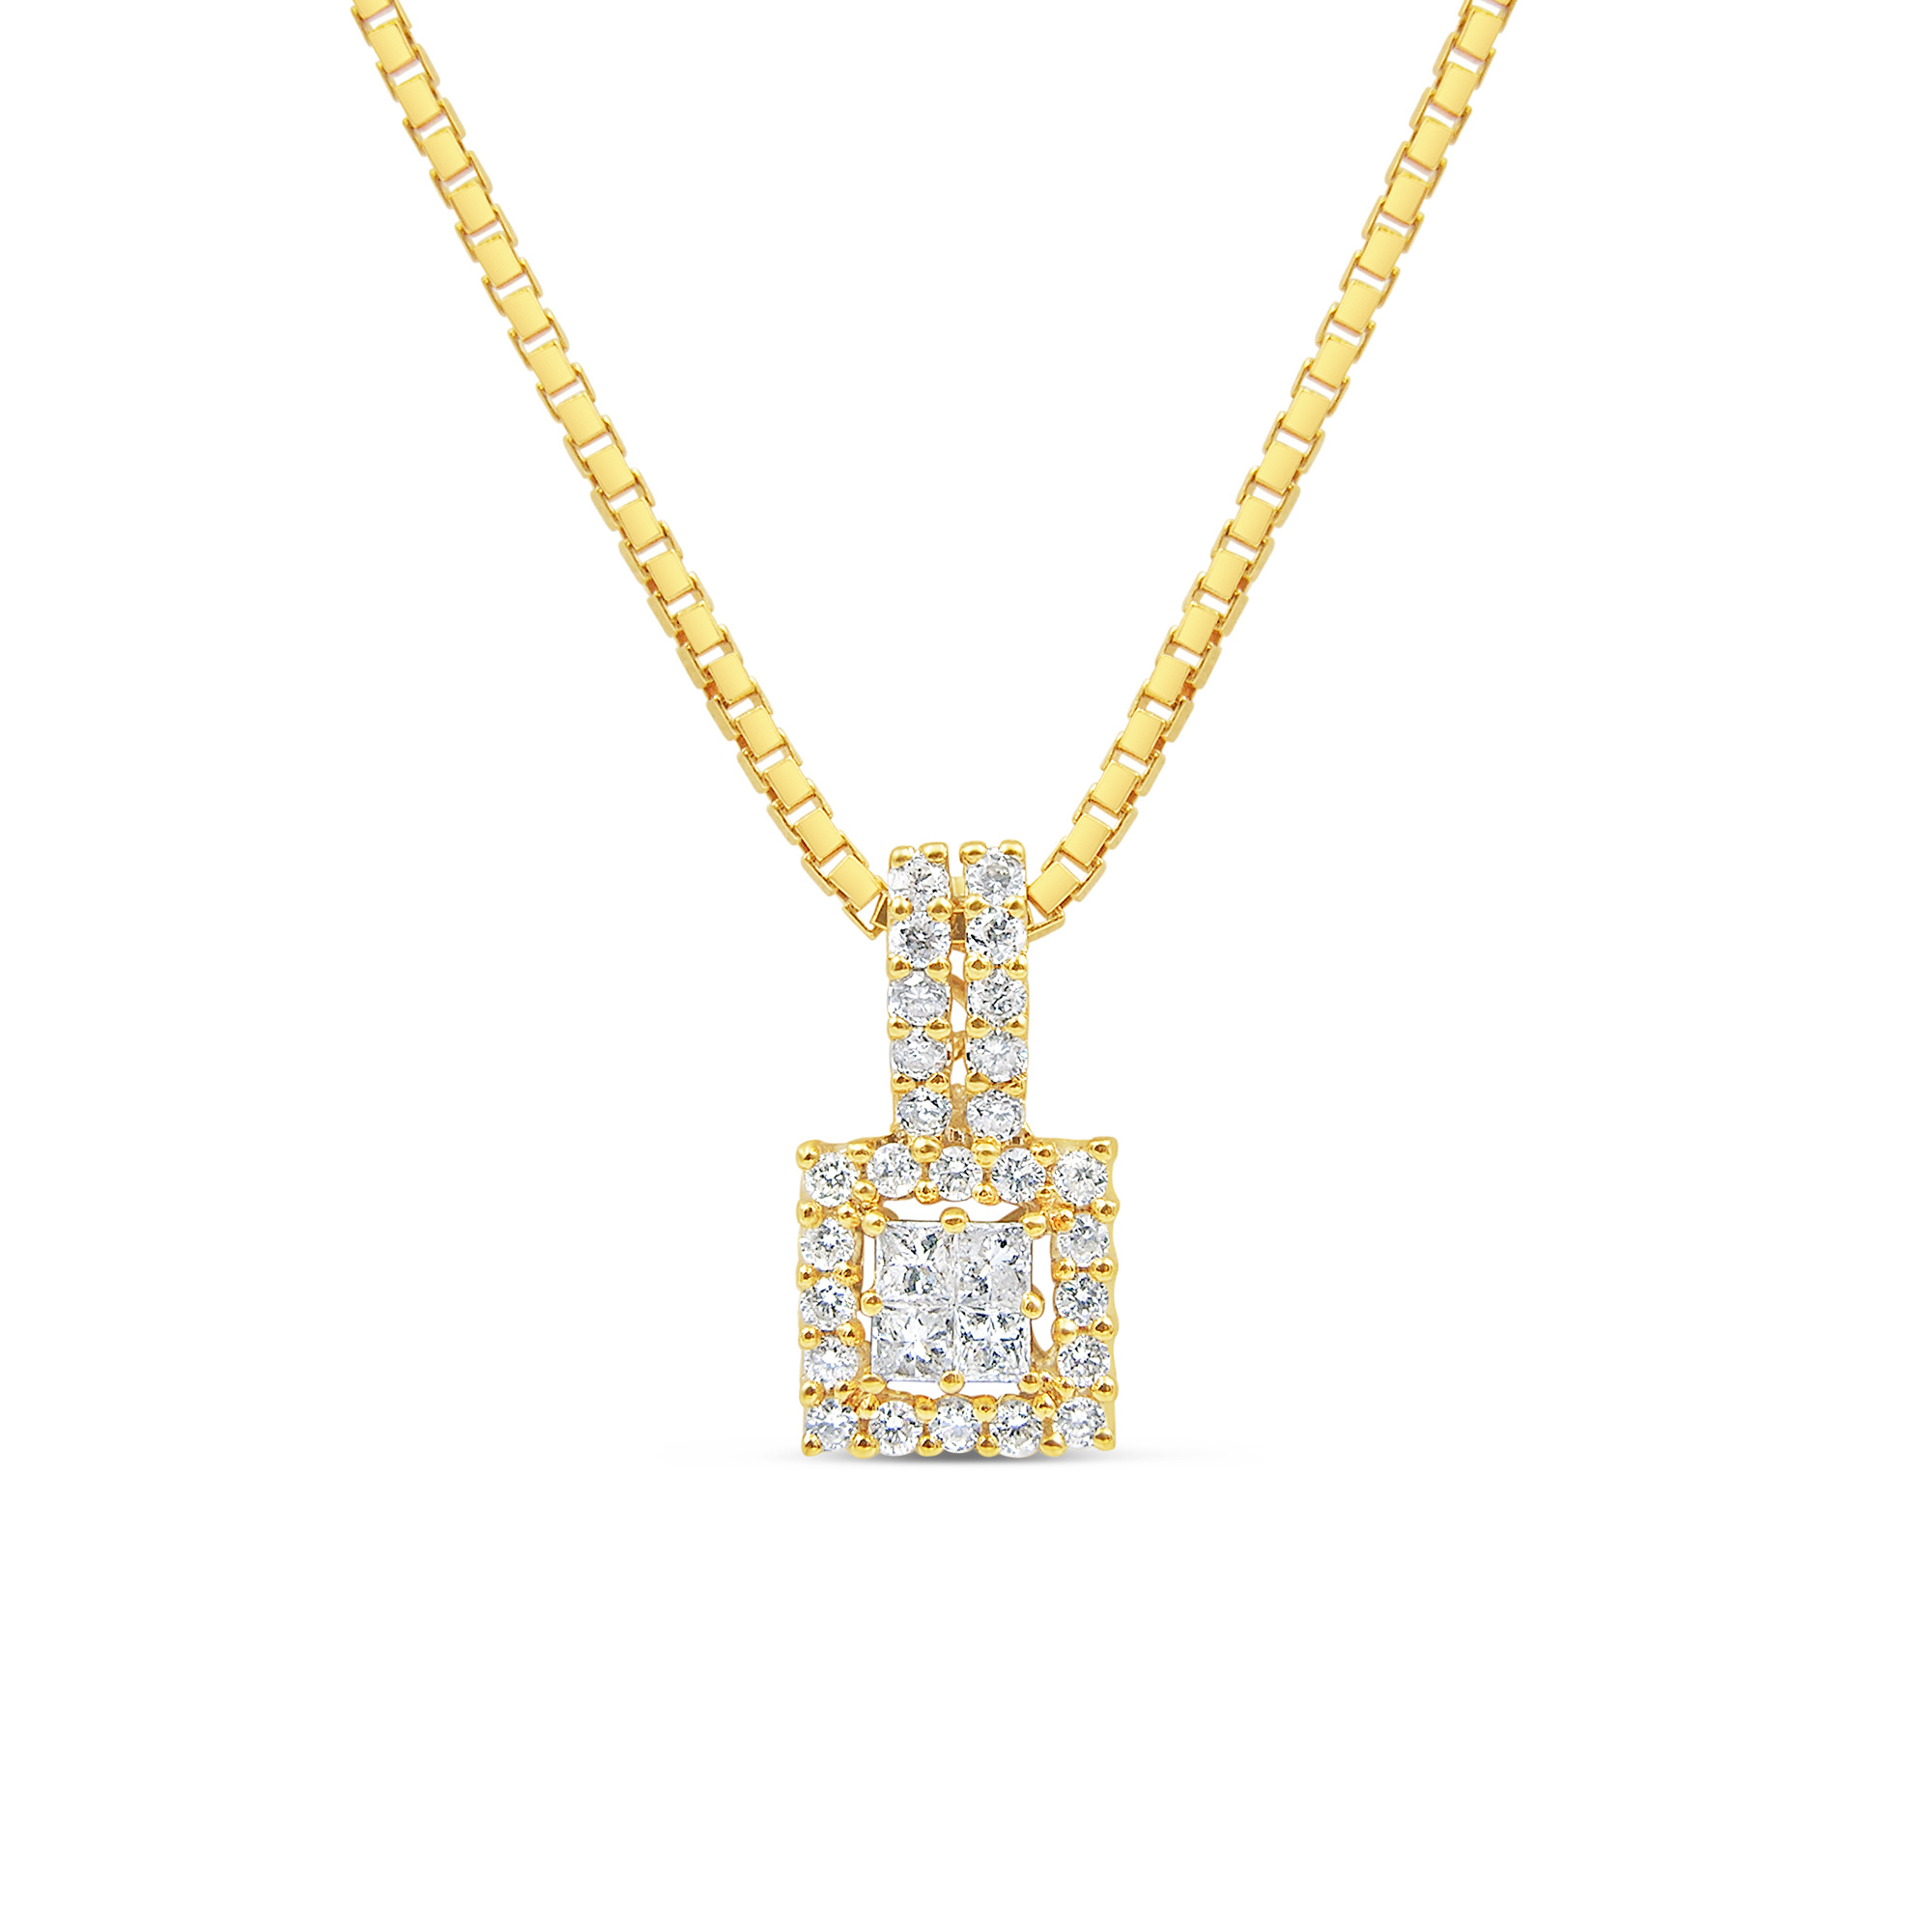 18kt yellow gold pendant with 0.32 ct diamonds